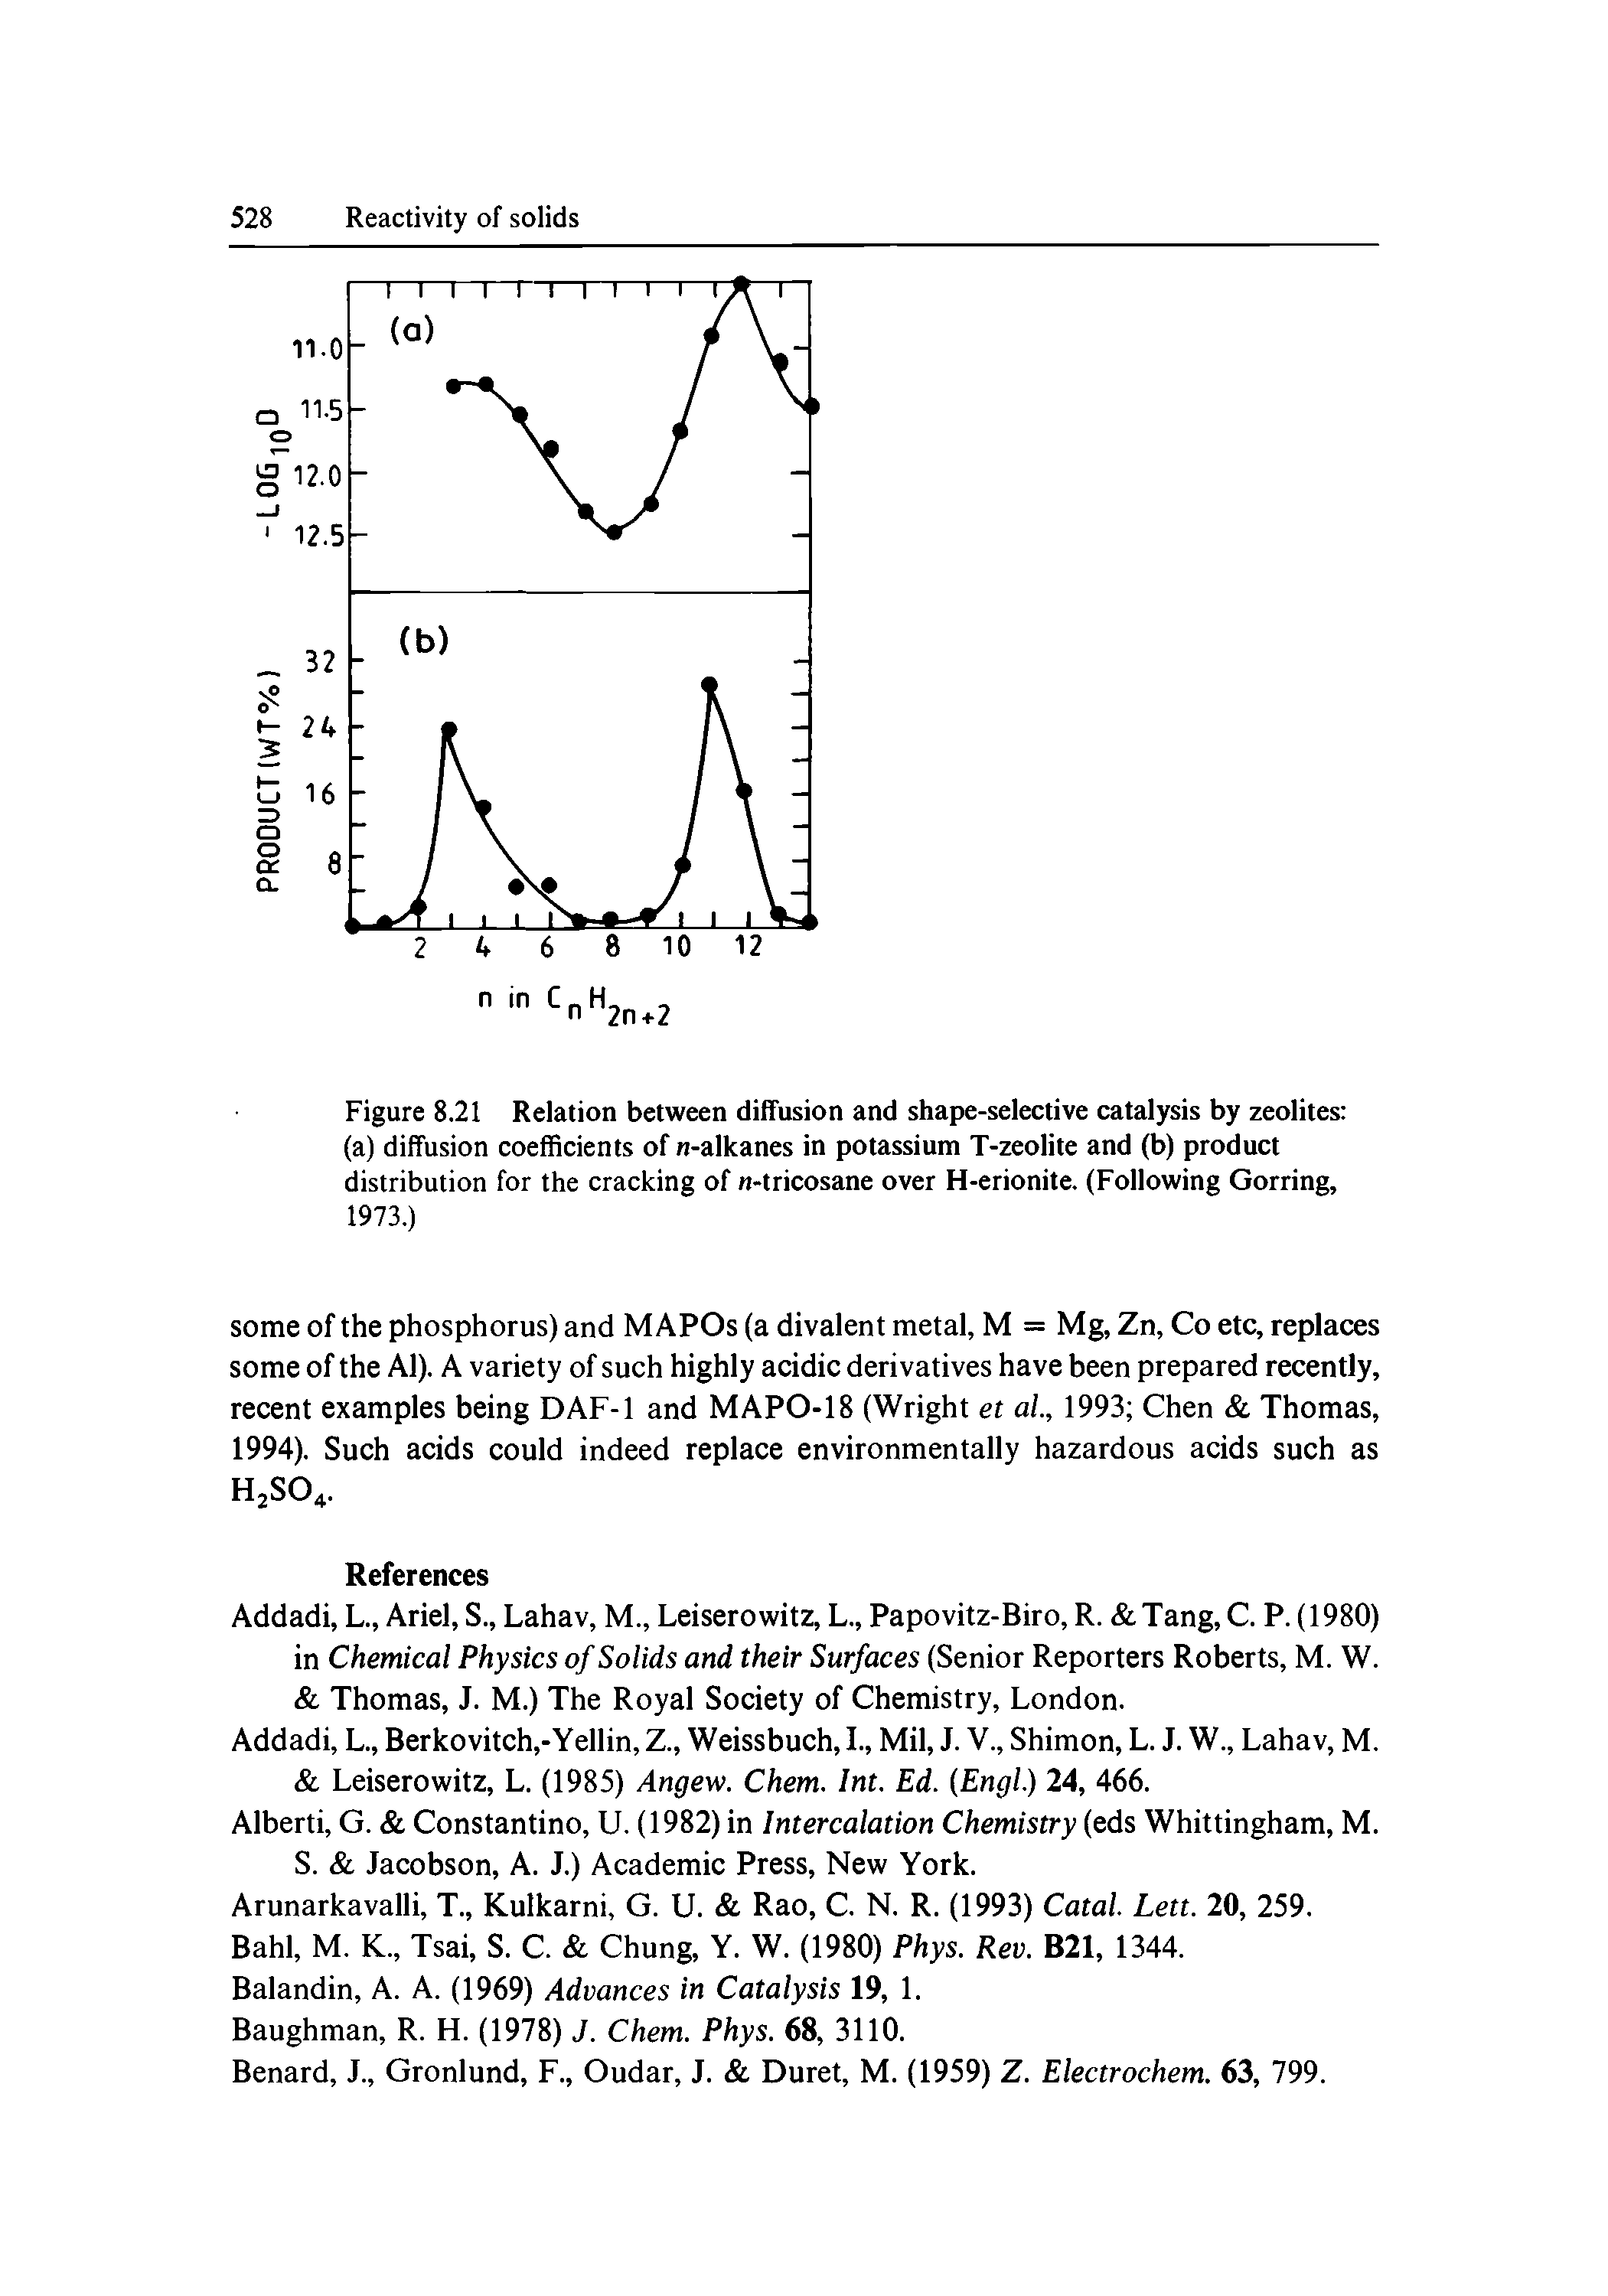 Figure 8.21 Relation between diffusion and shape-selective catalysis by zeolites (a) diffusion coefficients of -alkanes in potassium T-zeolite and (b) product distribution for the cracking of n-tricosane over H-erionite. (Following Gorring, 1973.)...